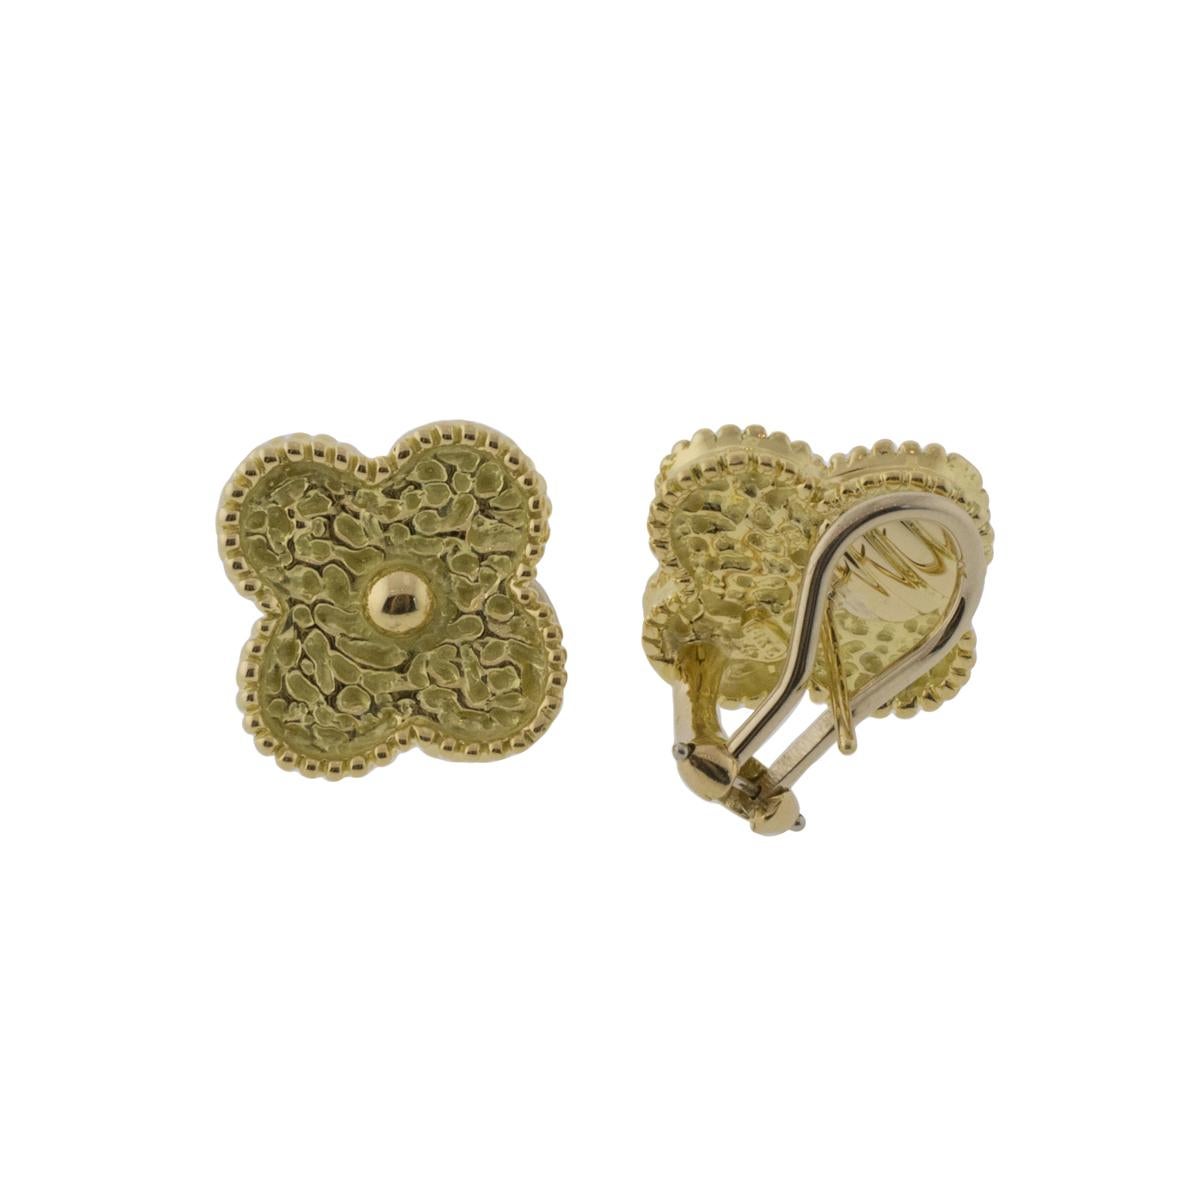 Experience the timeless beauty of these 18k yellow gold quatrefoil lever back earrings. Delicate yet durable, the textured floral design on these 15mm wide earrings will ensure you stand out. A charming classic for any collection! This estate